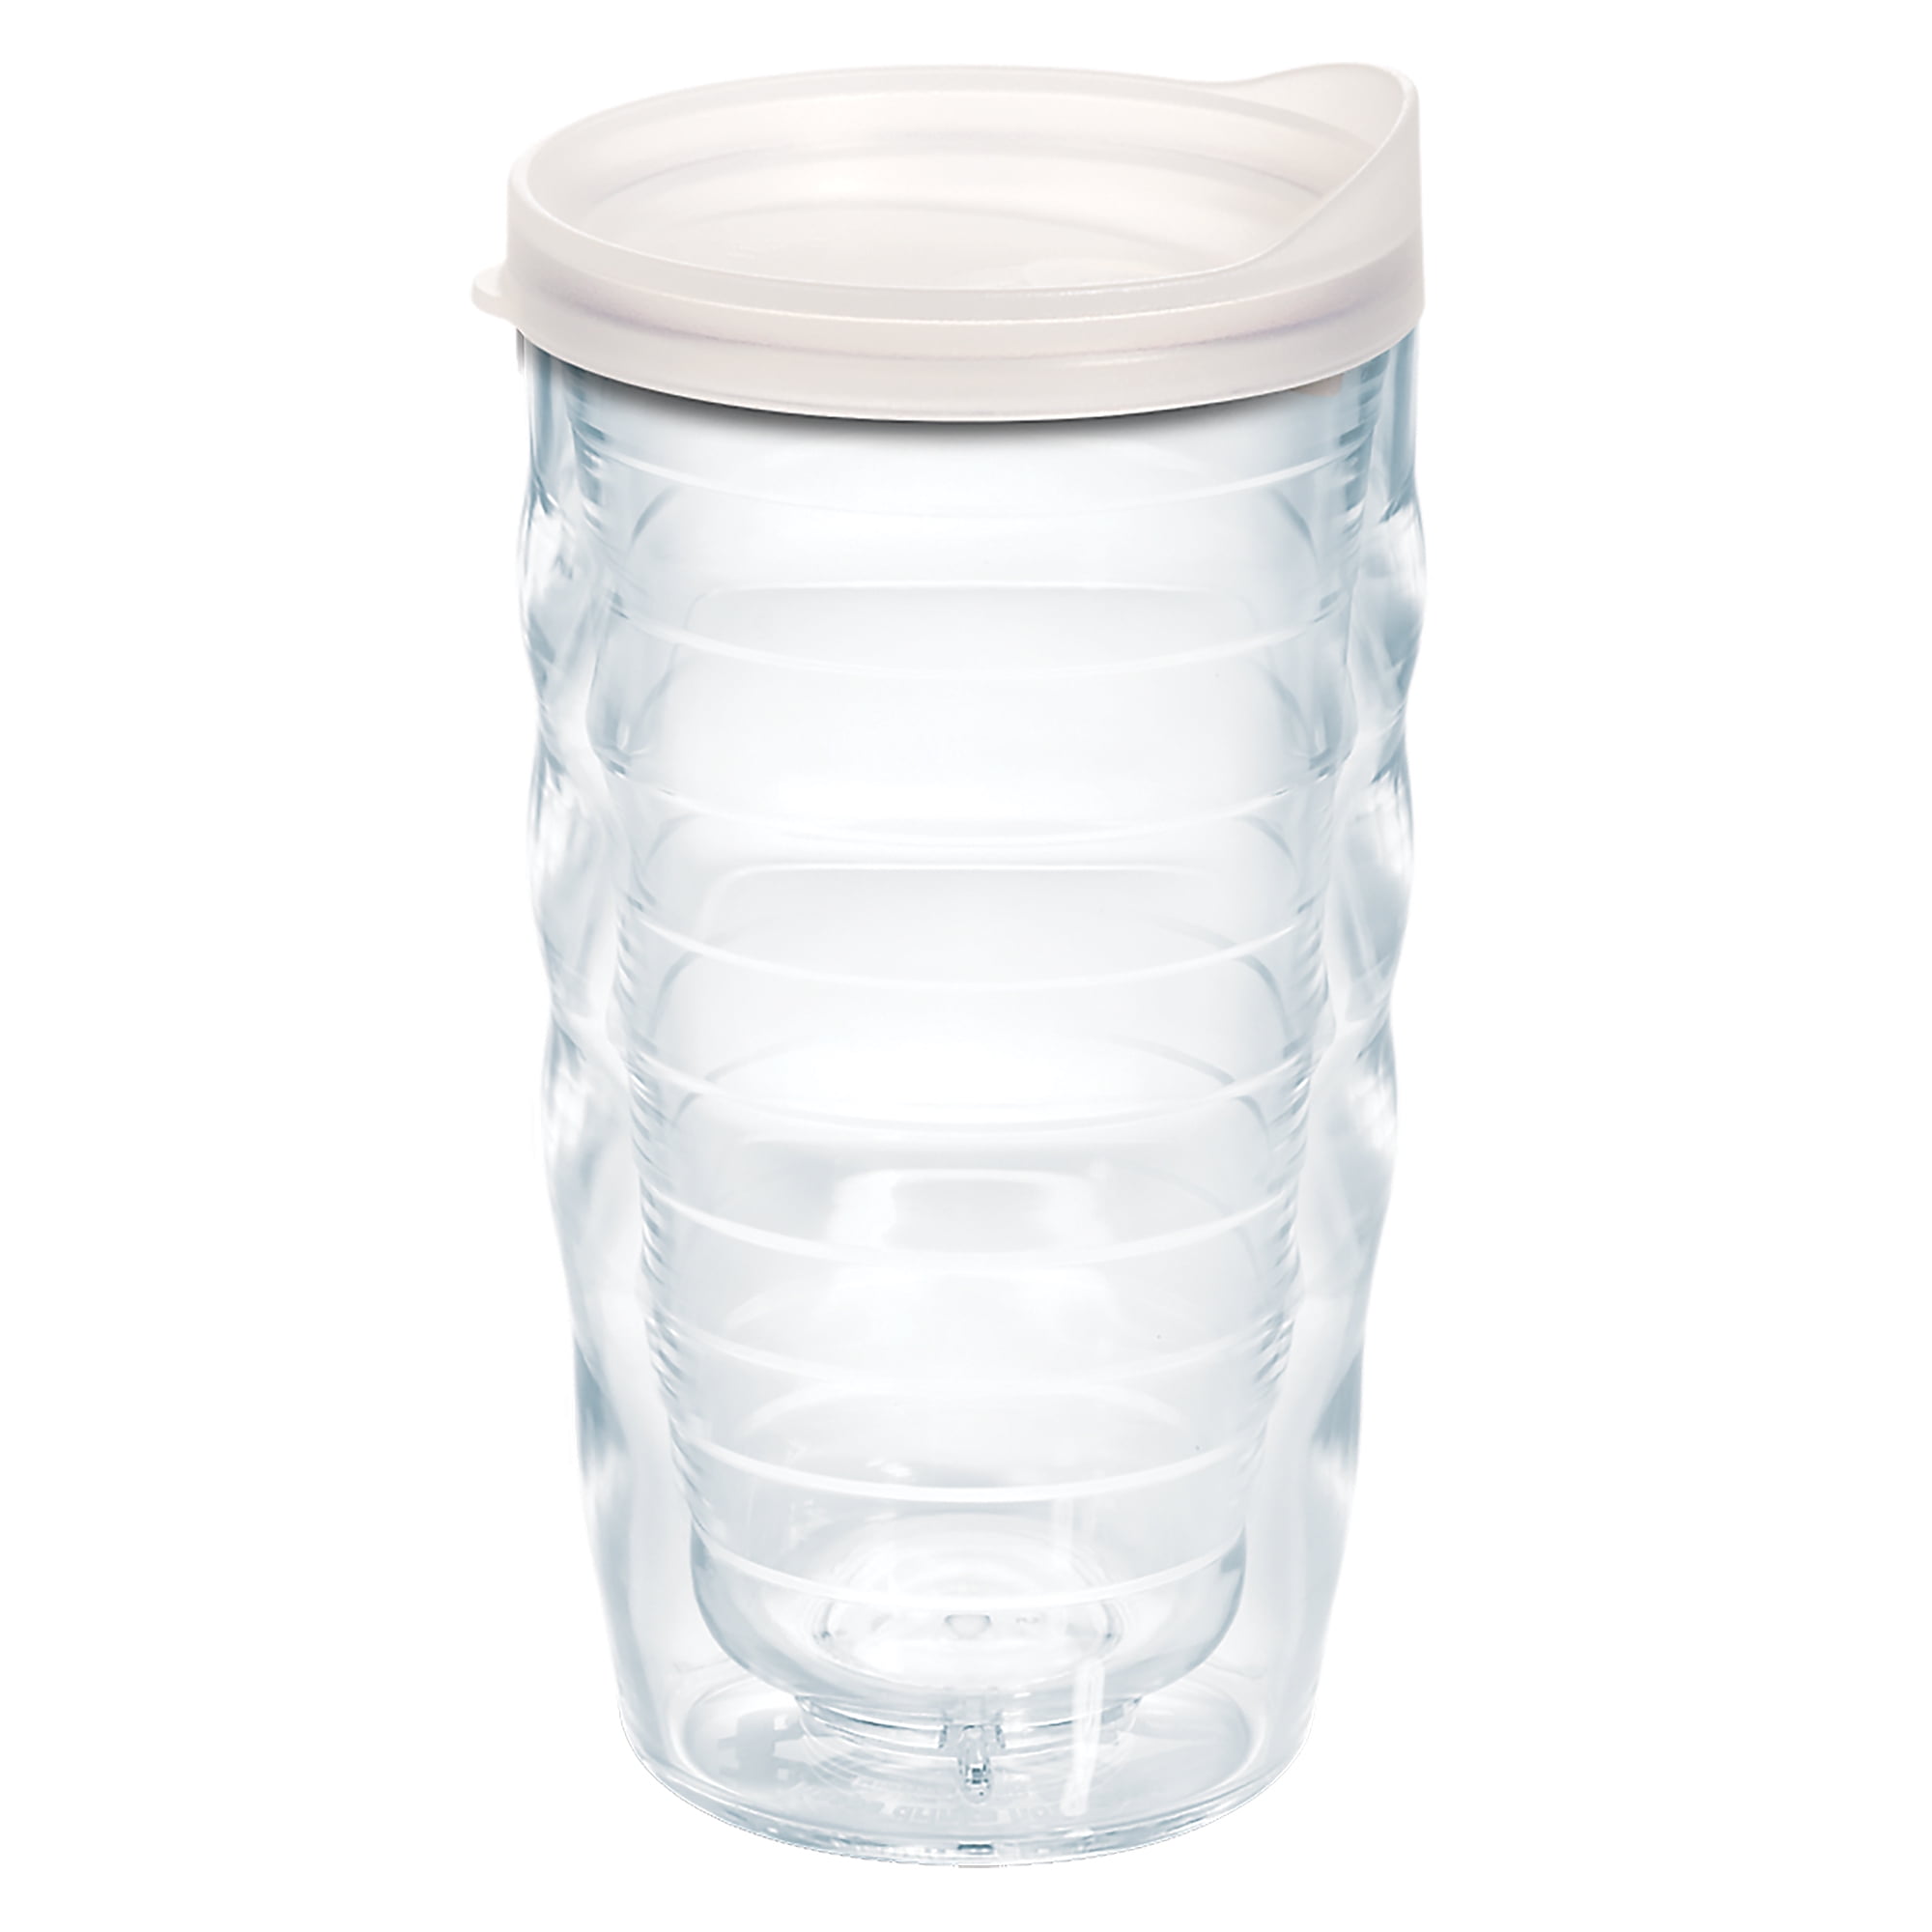 Tervis Travel Lid for 24oz Tumbler and 16oz Mug, Frosted, 24 oz